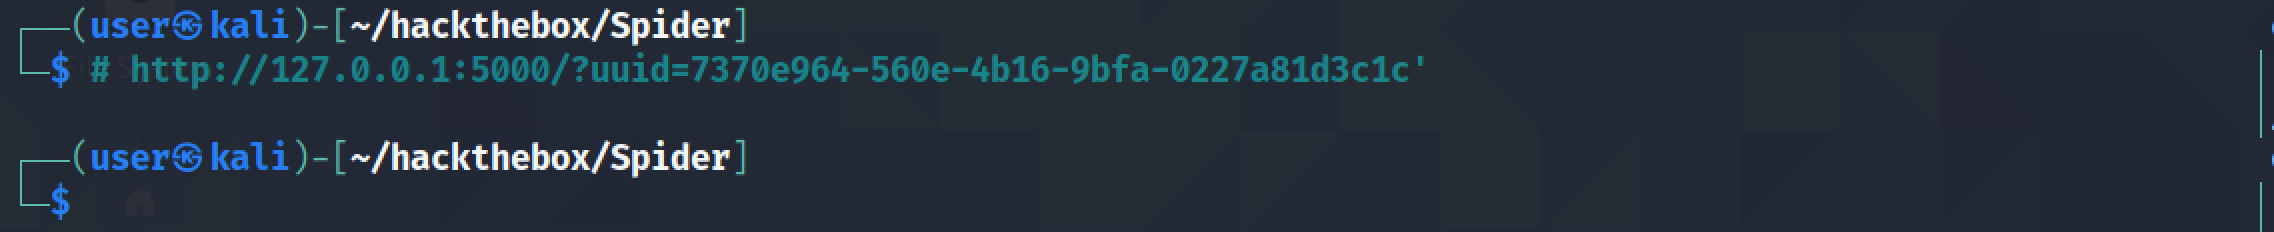 Adding a single quote to the UUID.